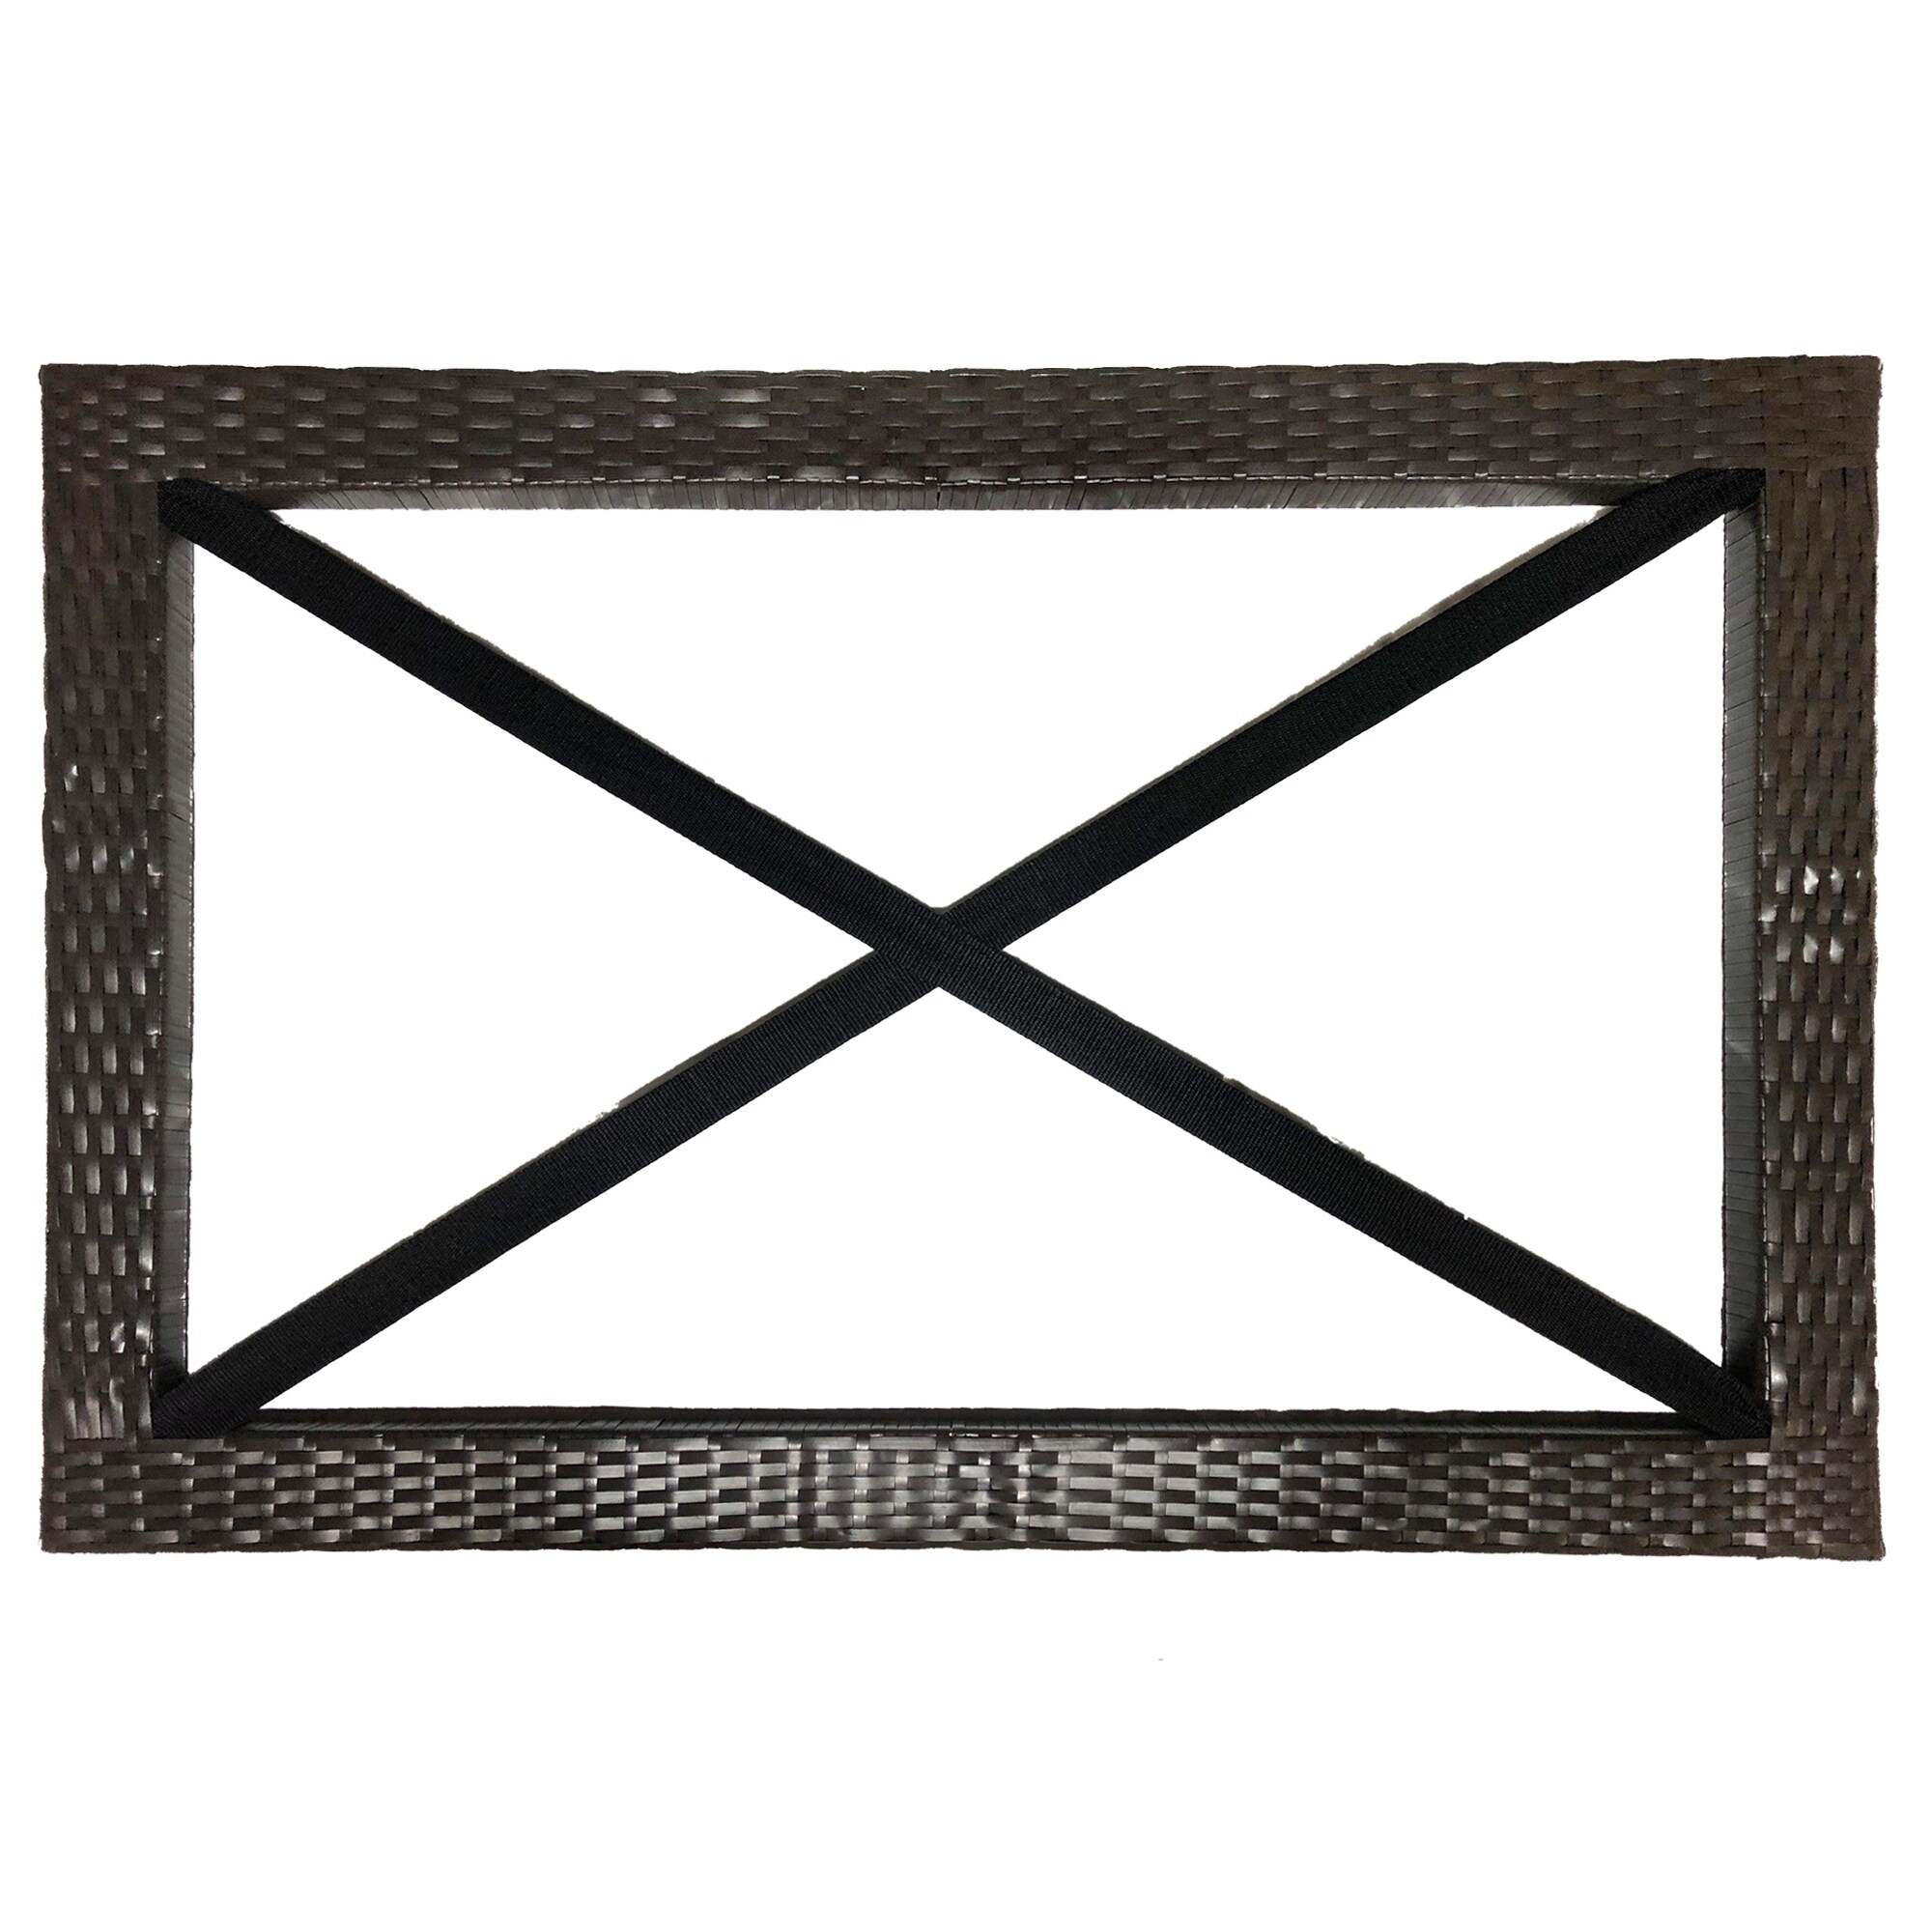 All Weather Wicker Tray Mat Frame (coir doormat not included